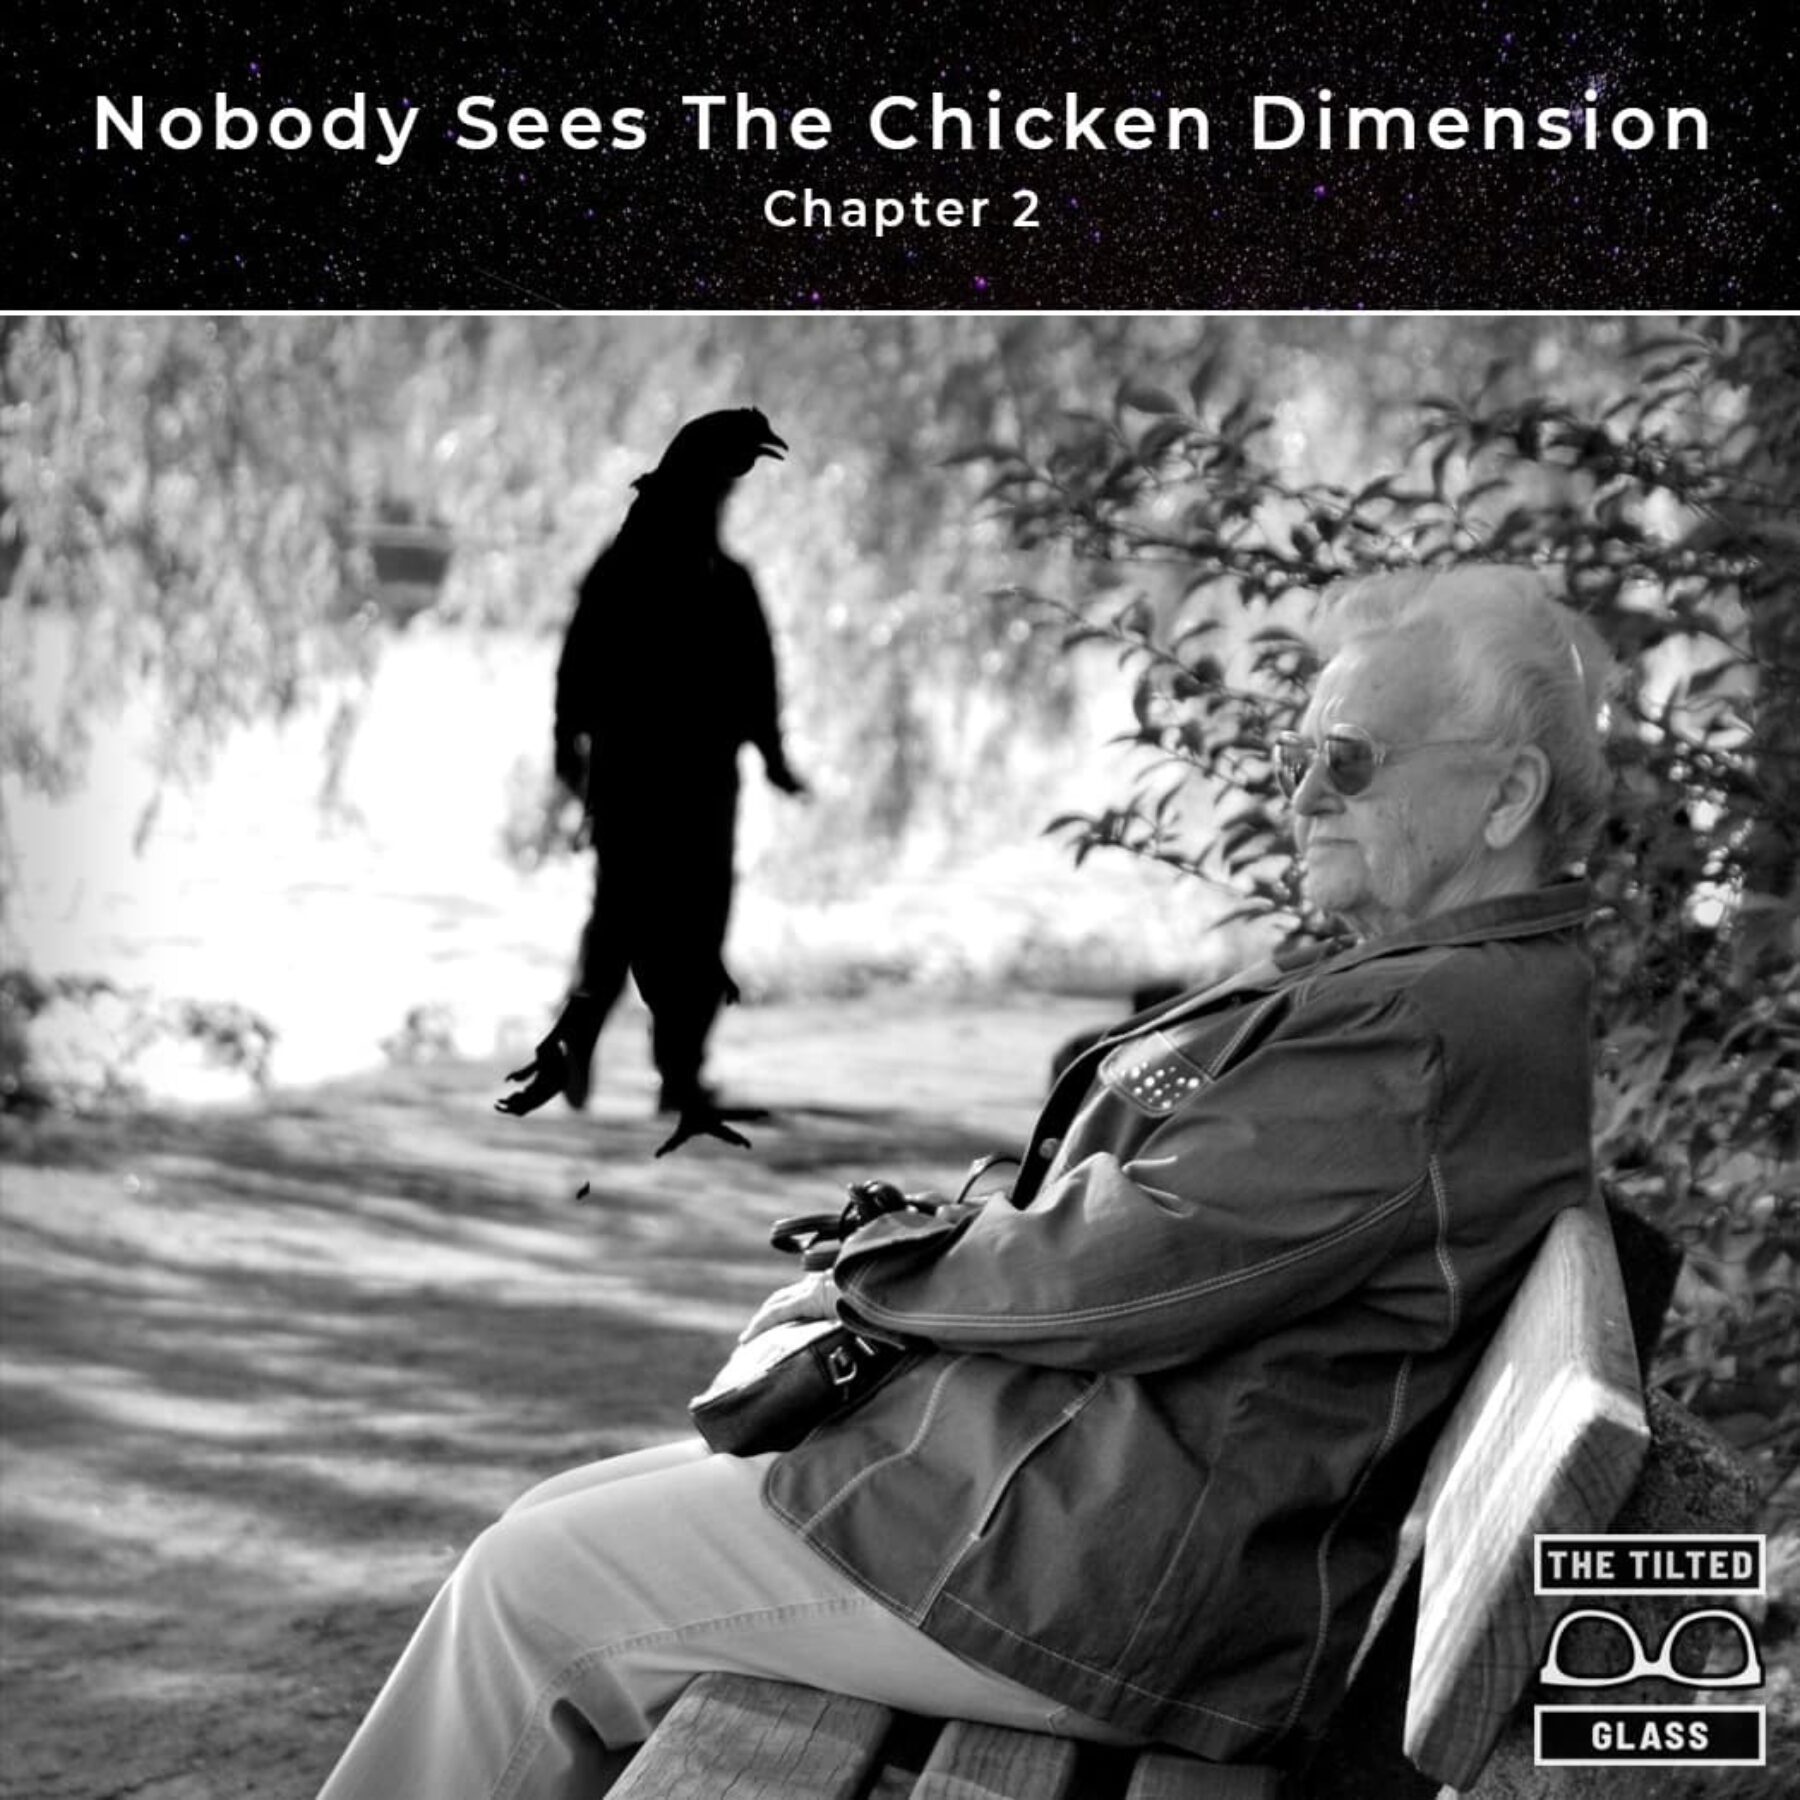 Nobody Sees The Chicken Dimension  - Chapter 2 - Park Place